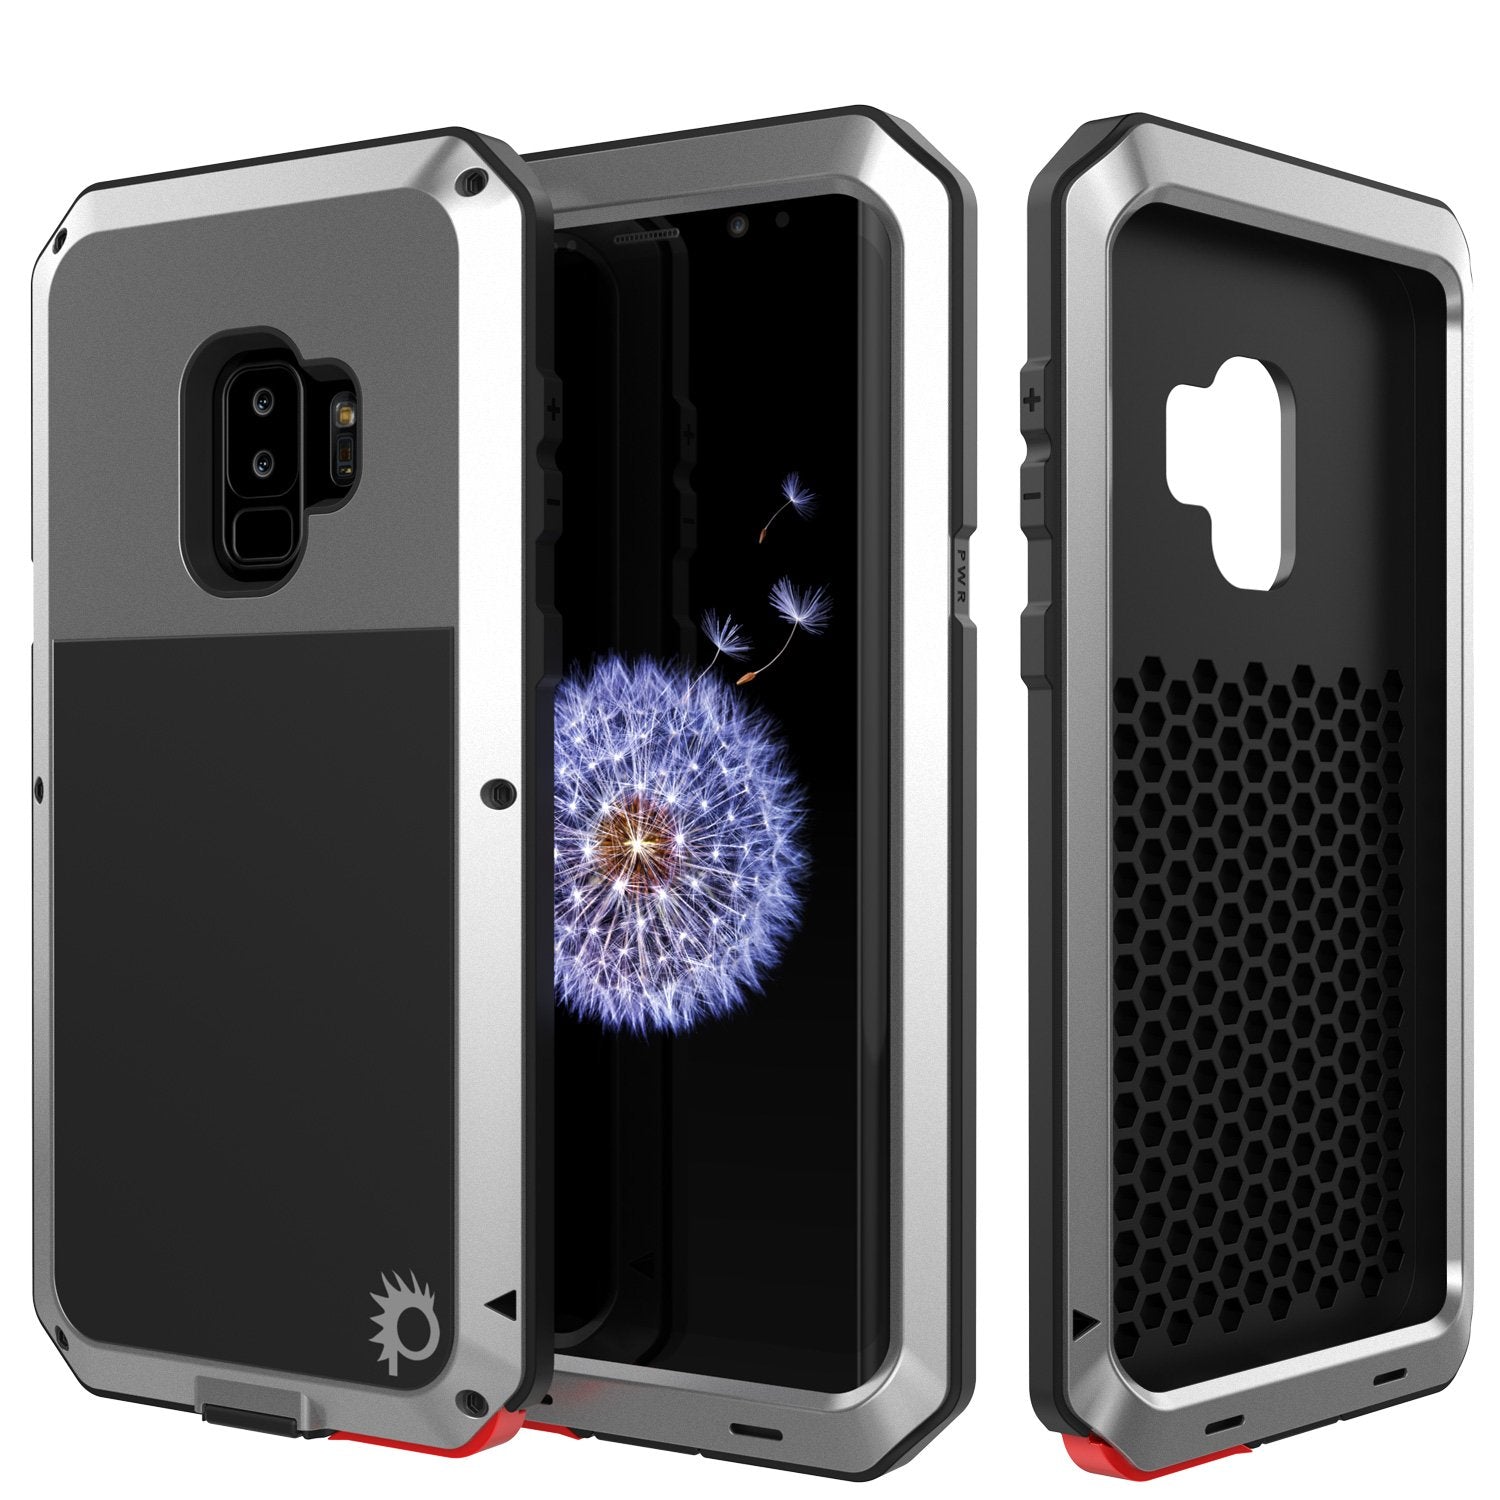 Galaxy S9 Plus Metal Case, Heavy Duty Military Grade Rugged Armor Cover [shock proof] Hybrid Full Body Hard Aluminum & TPU Design [non slip] W/ Prime Drop Protection for Samsung Galaxy S9 Plus [Silver] - PunkCase NZ